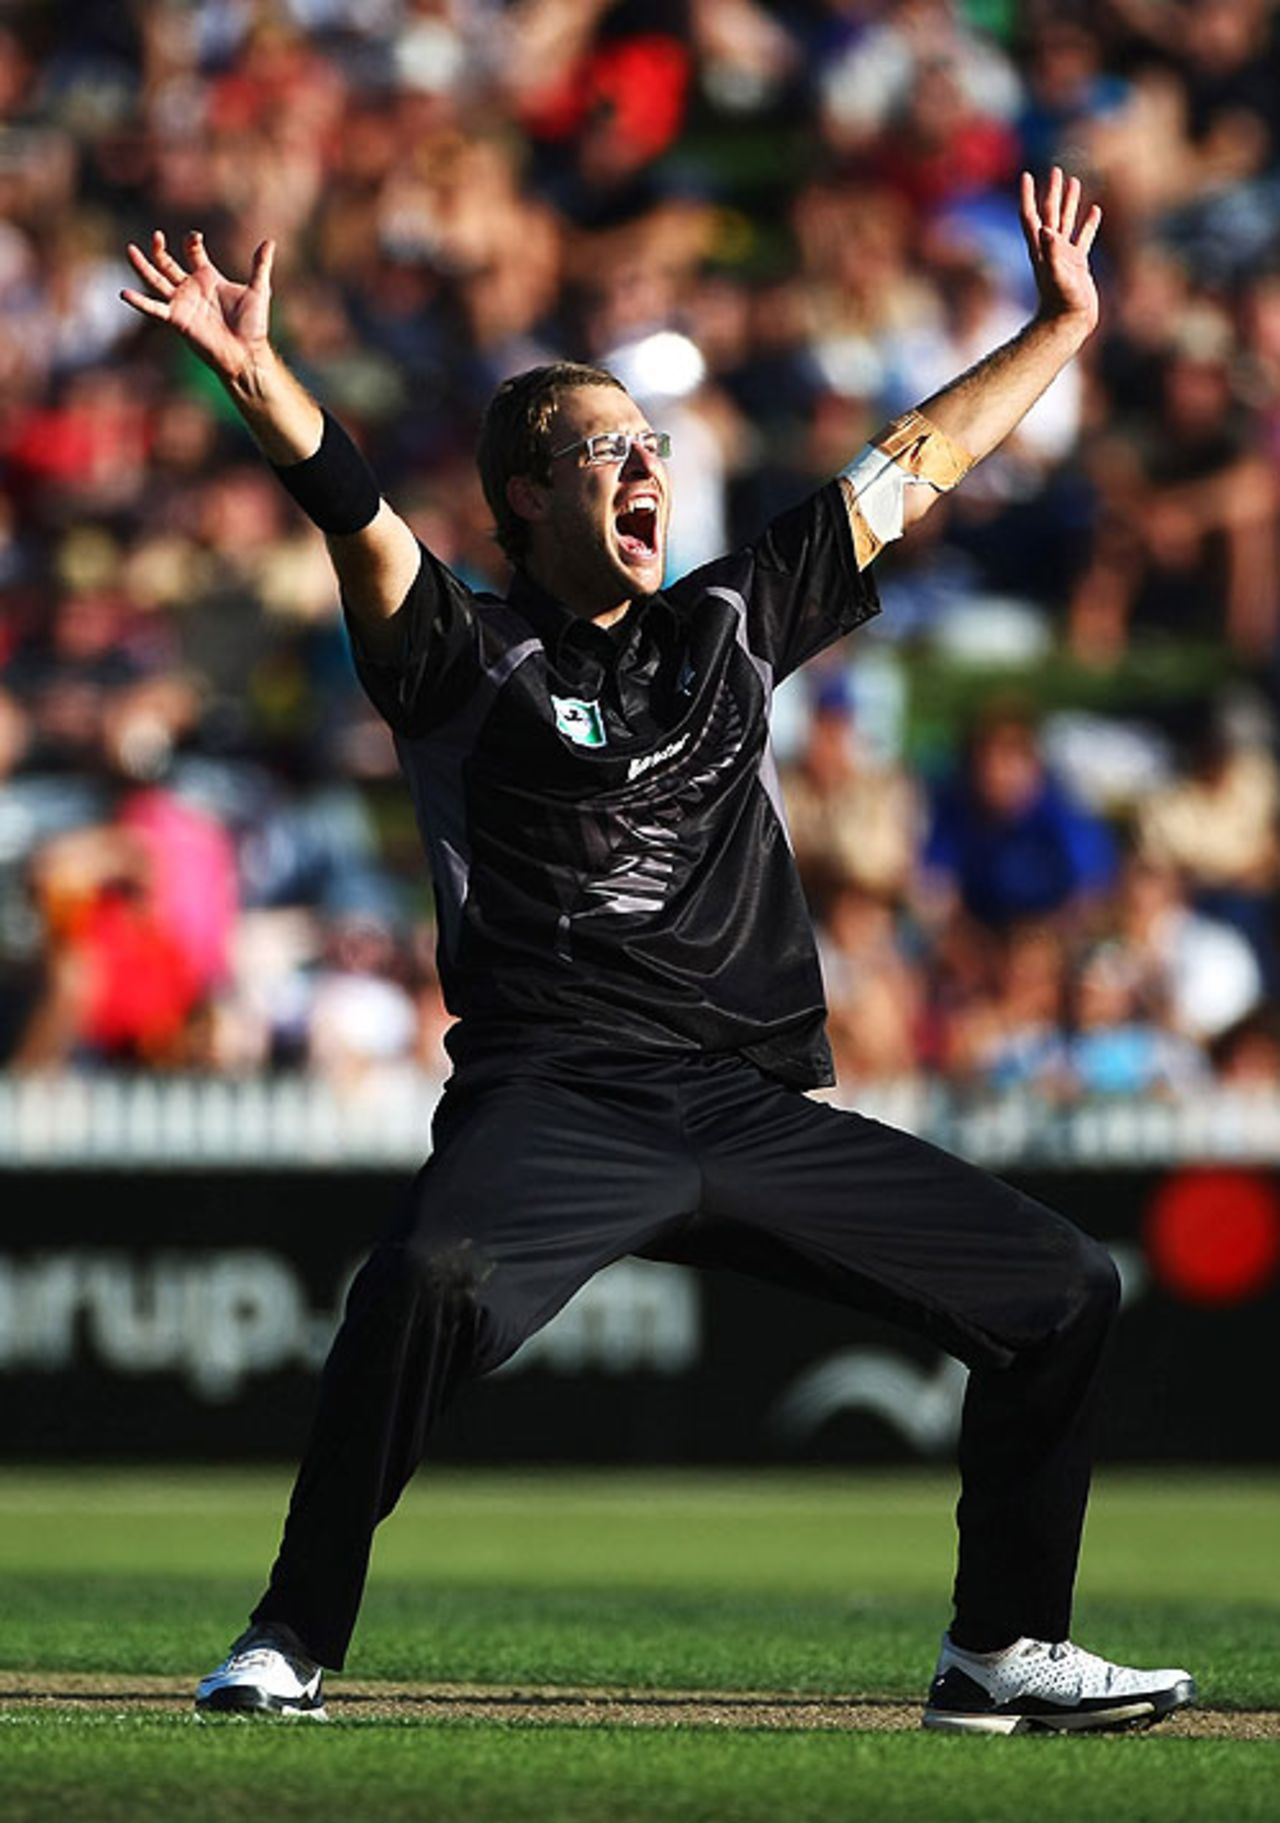 Daniel Vettori appeals as England collapse to 158 all out, New Zealand v England, 2nd ODI, Hamilton, February 12, 2008